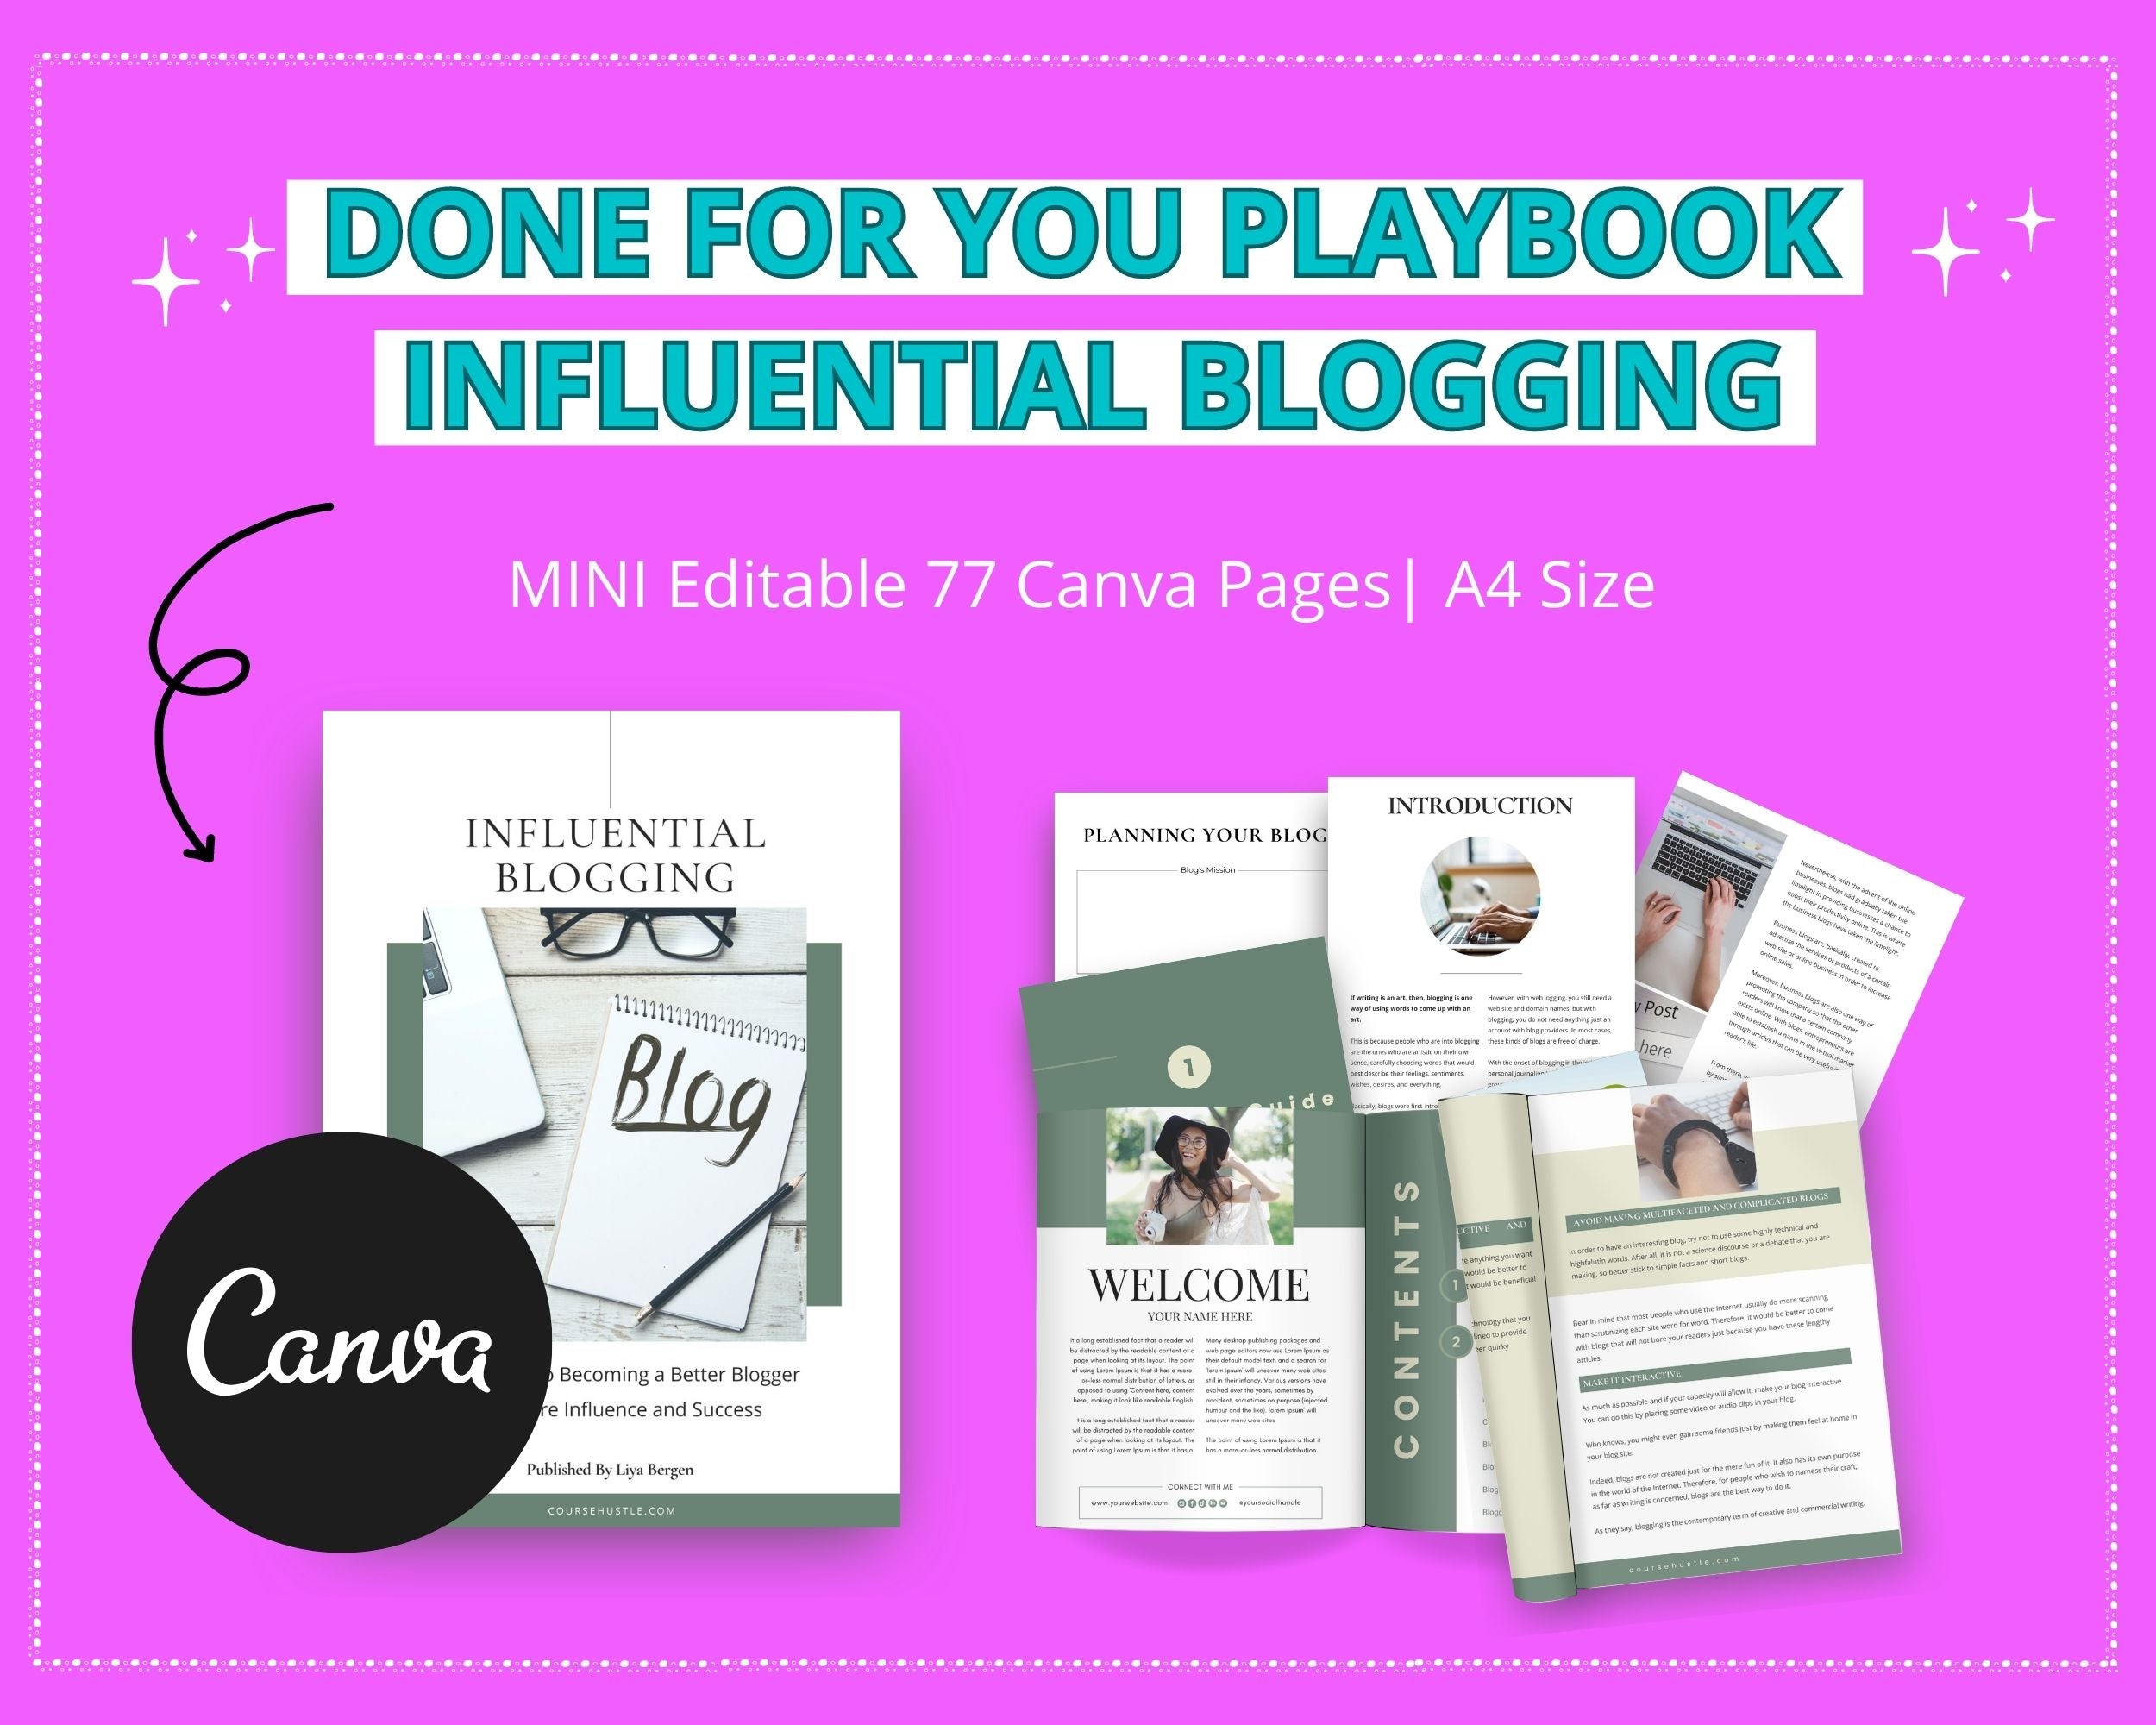 Done-for-You Influential Blogging Playbook in Canva